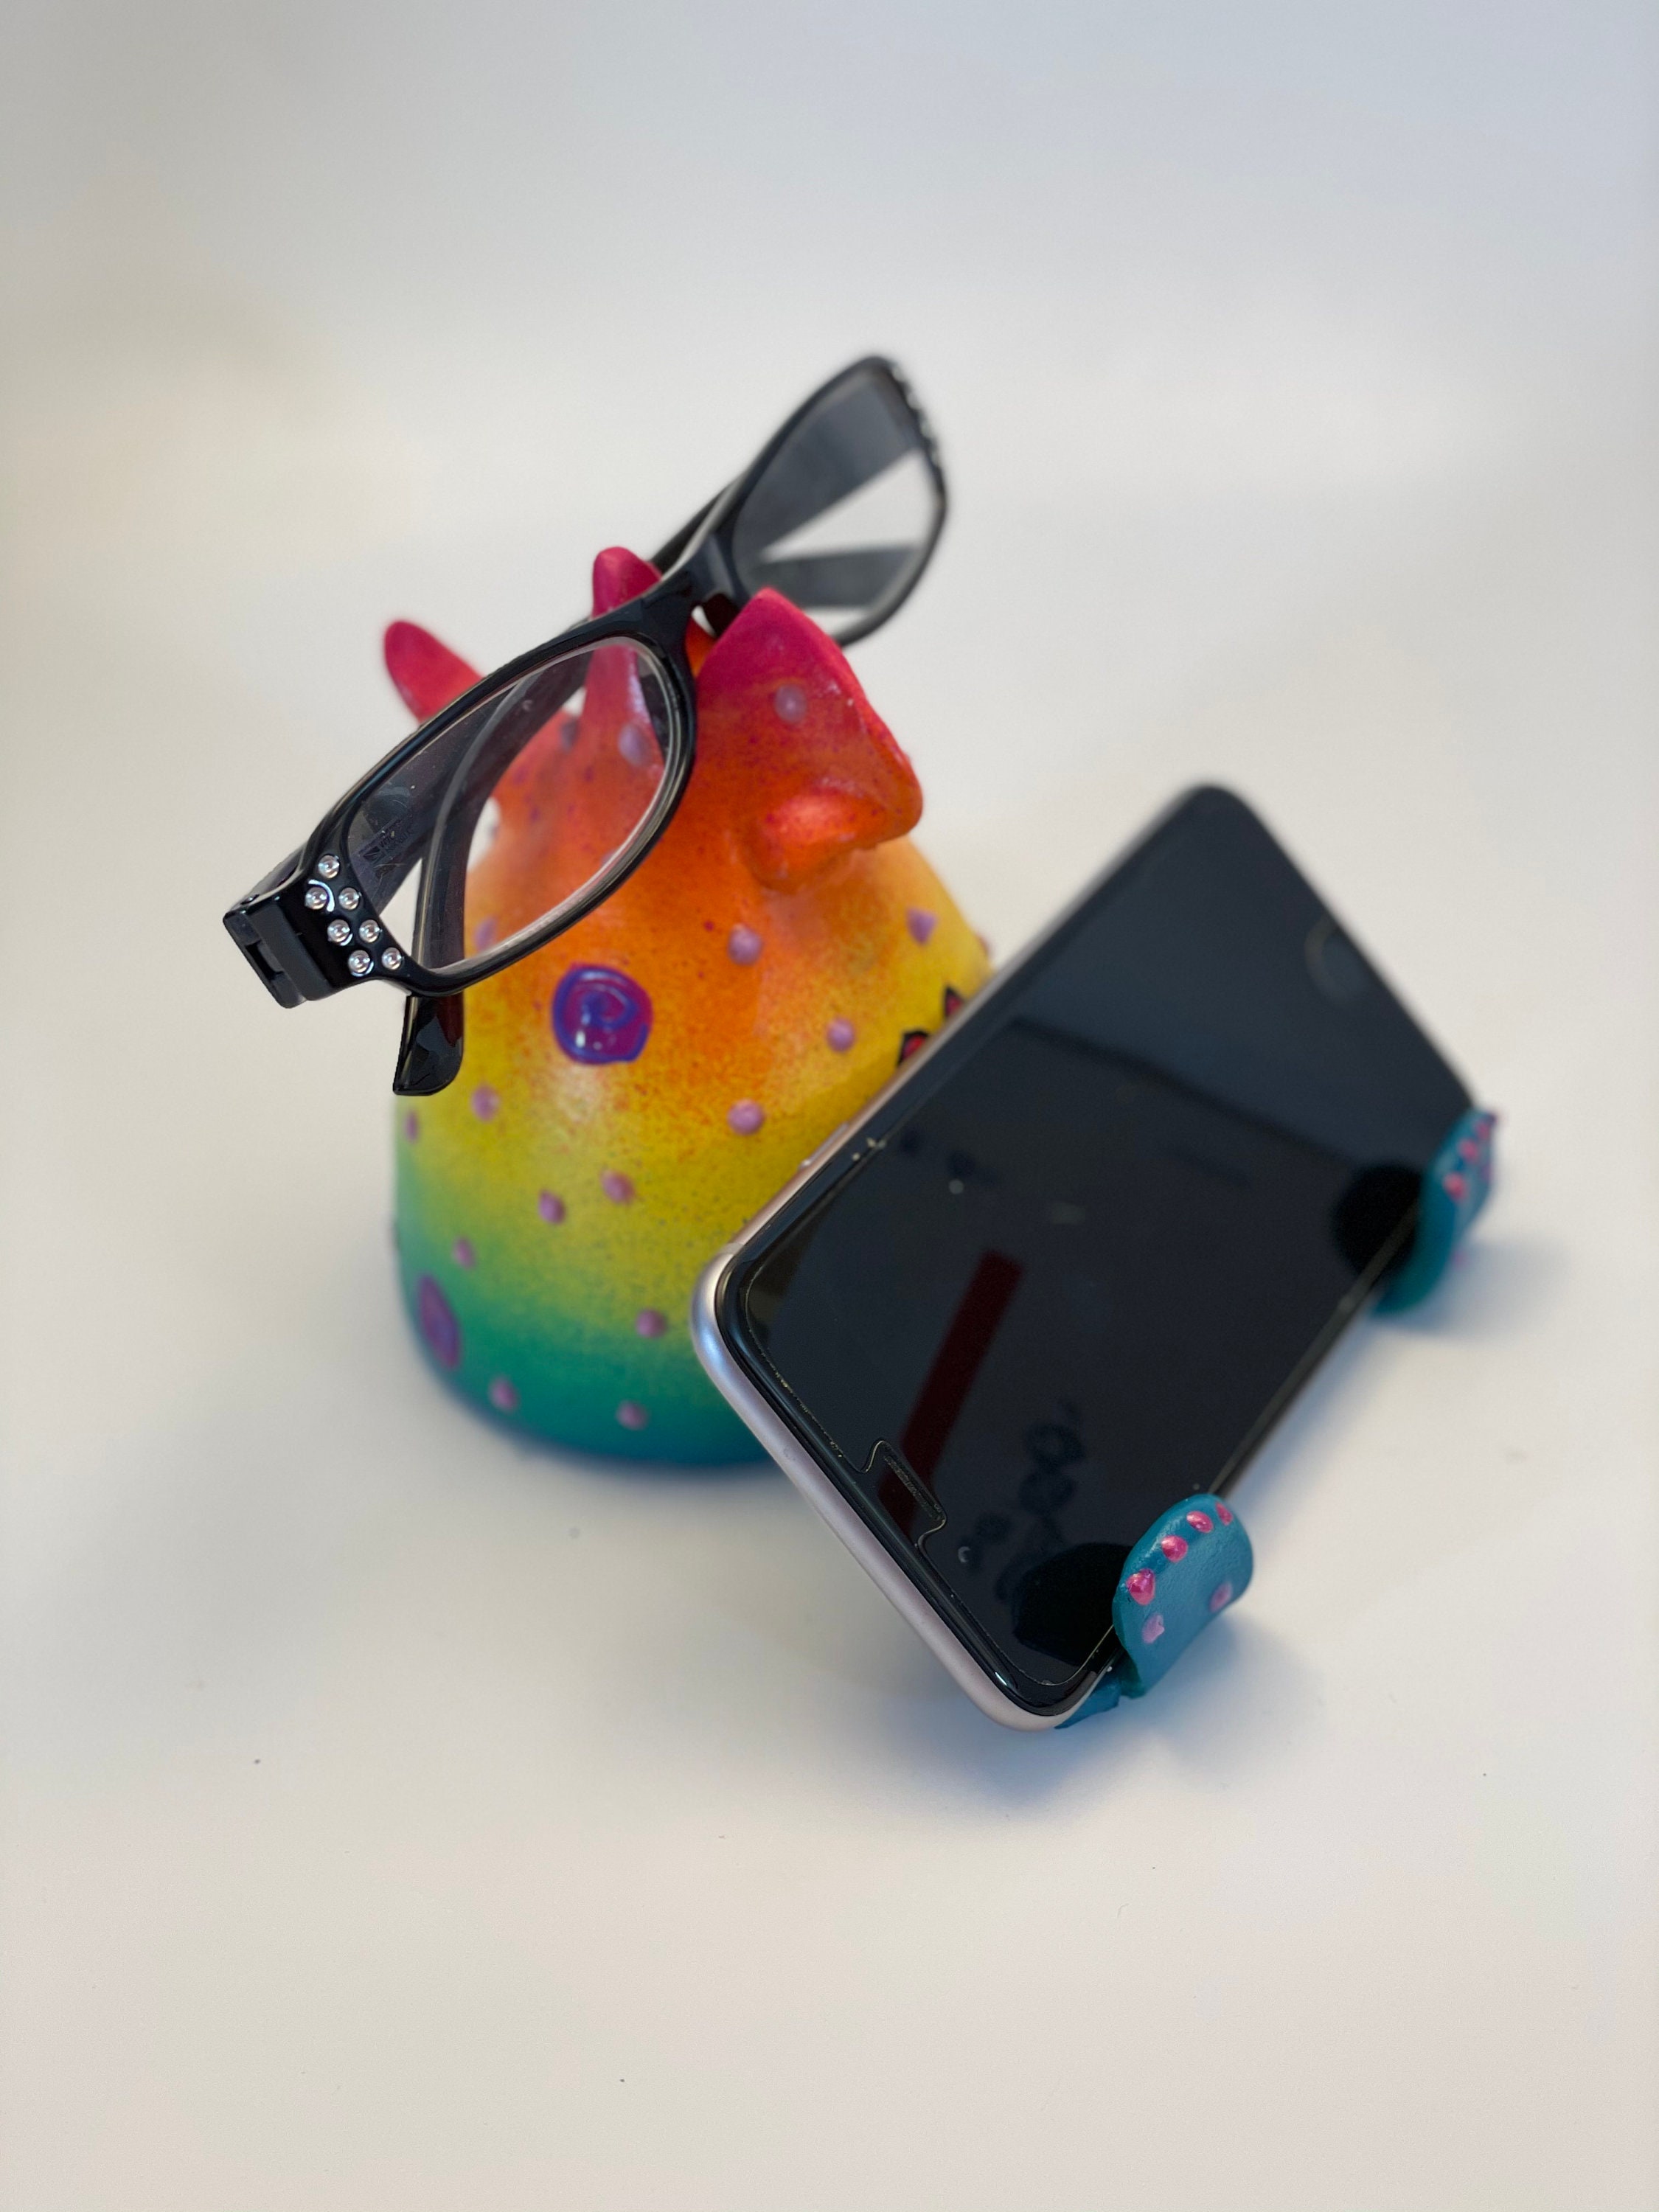 IPHONE STAND-EYE GLass Holder ,Cell Phone Desk Stand,Women Gift